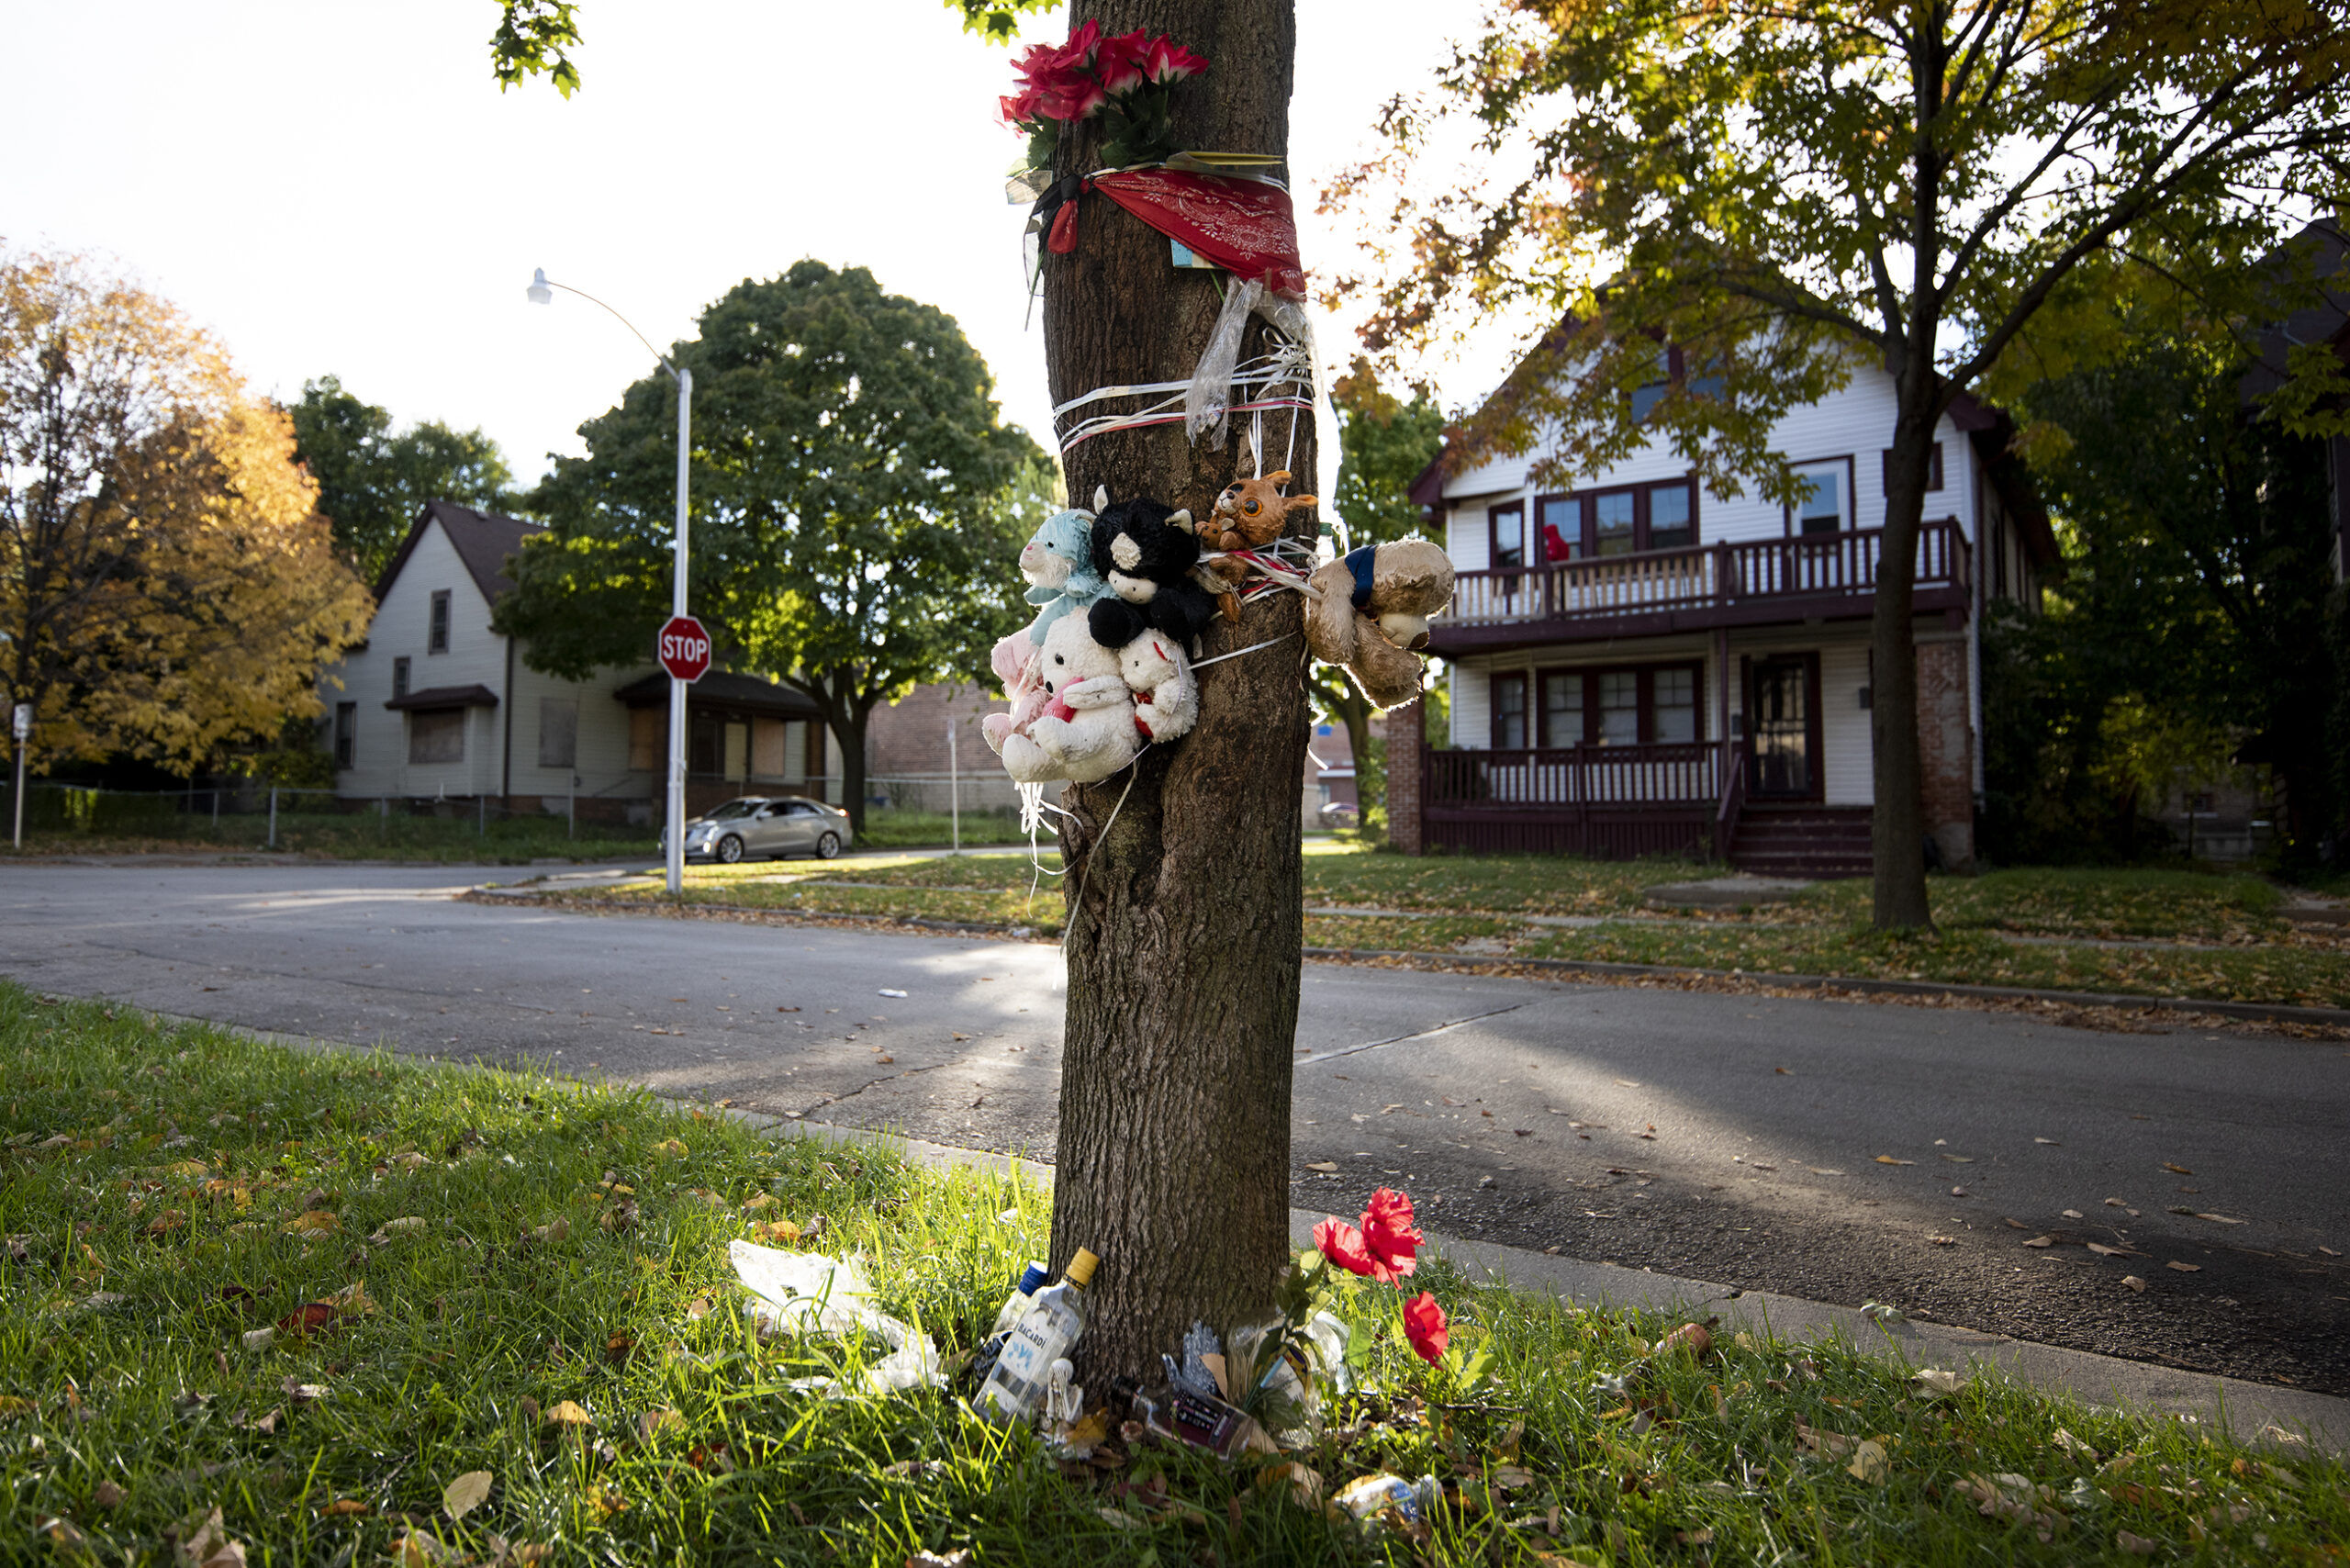 Toys and trees are tied to a tree. Alcohol bottles are on the ground.